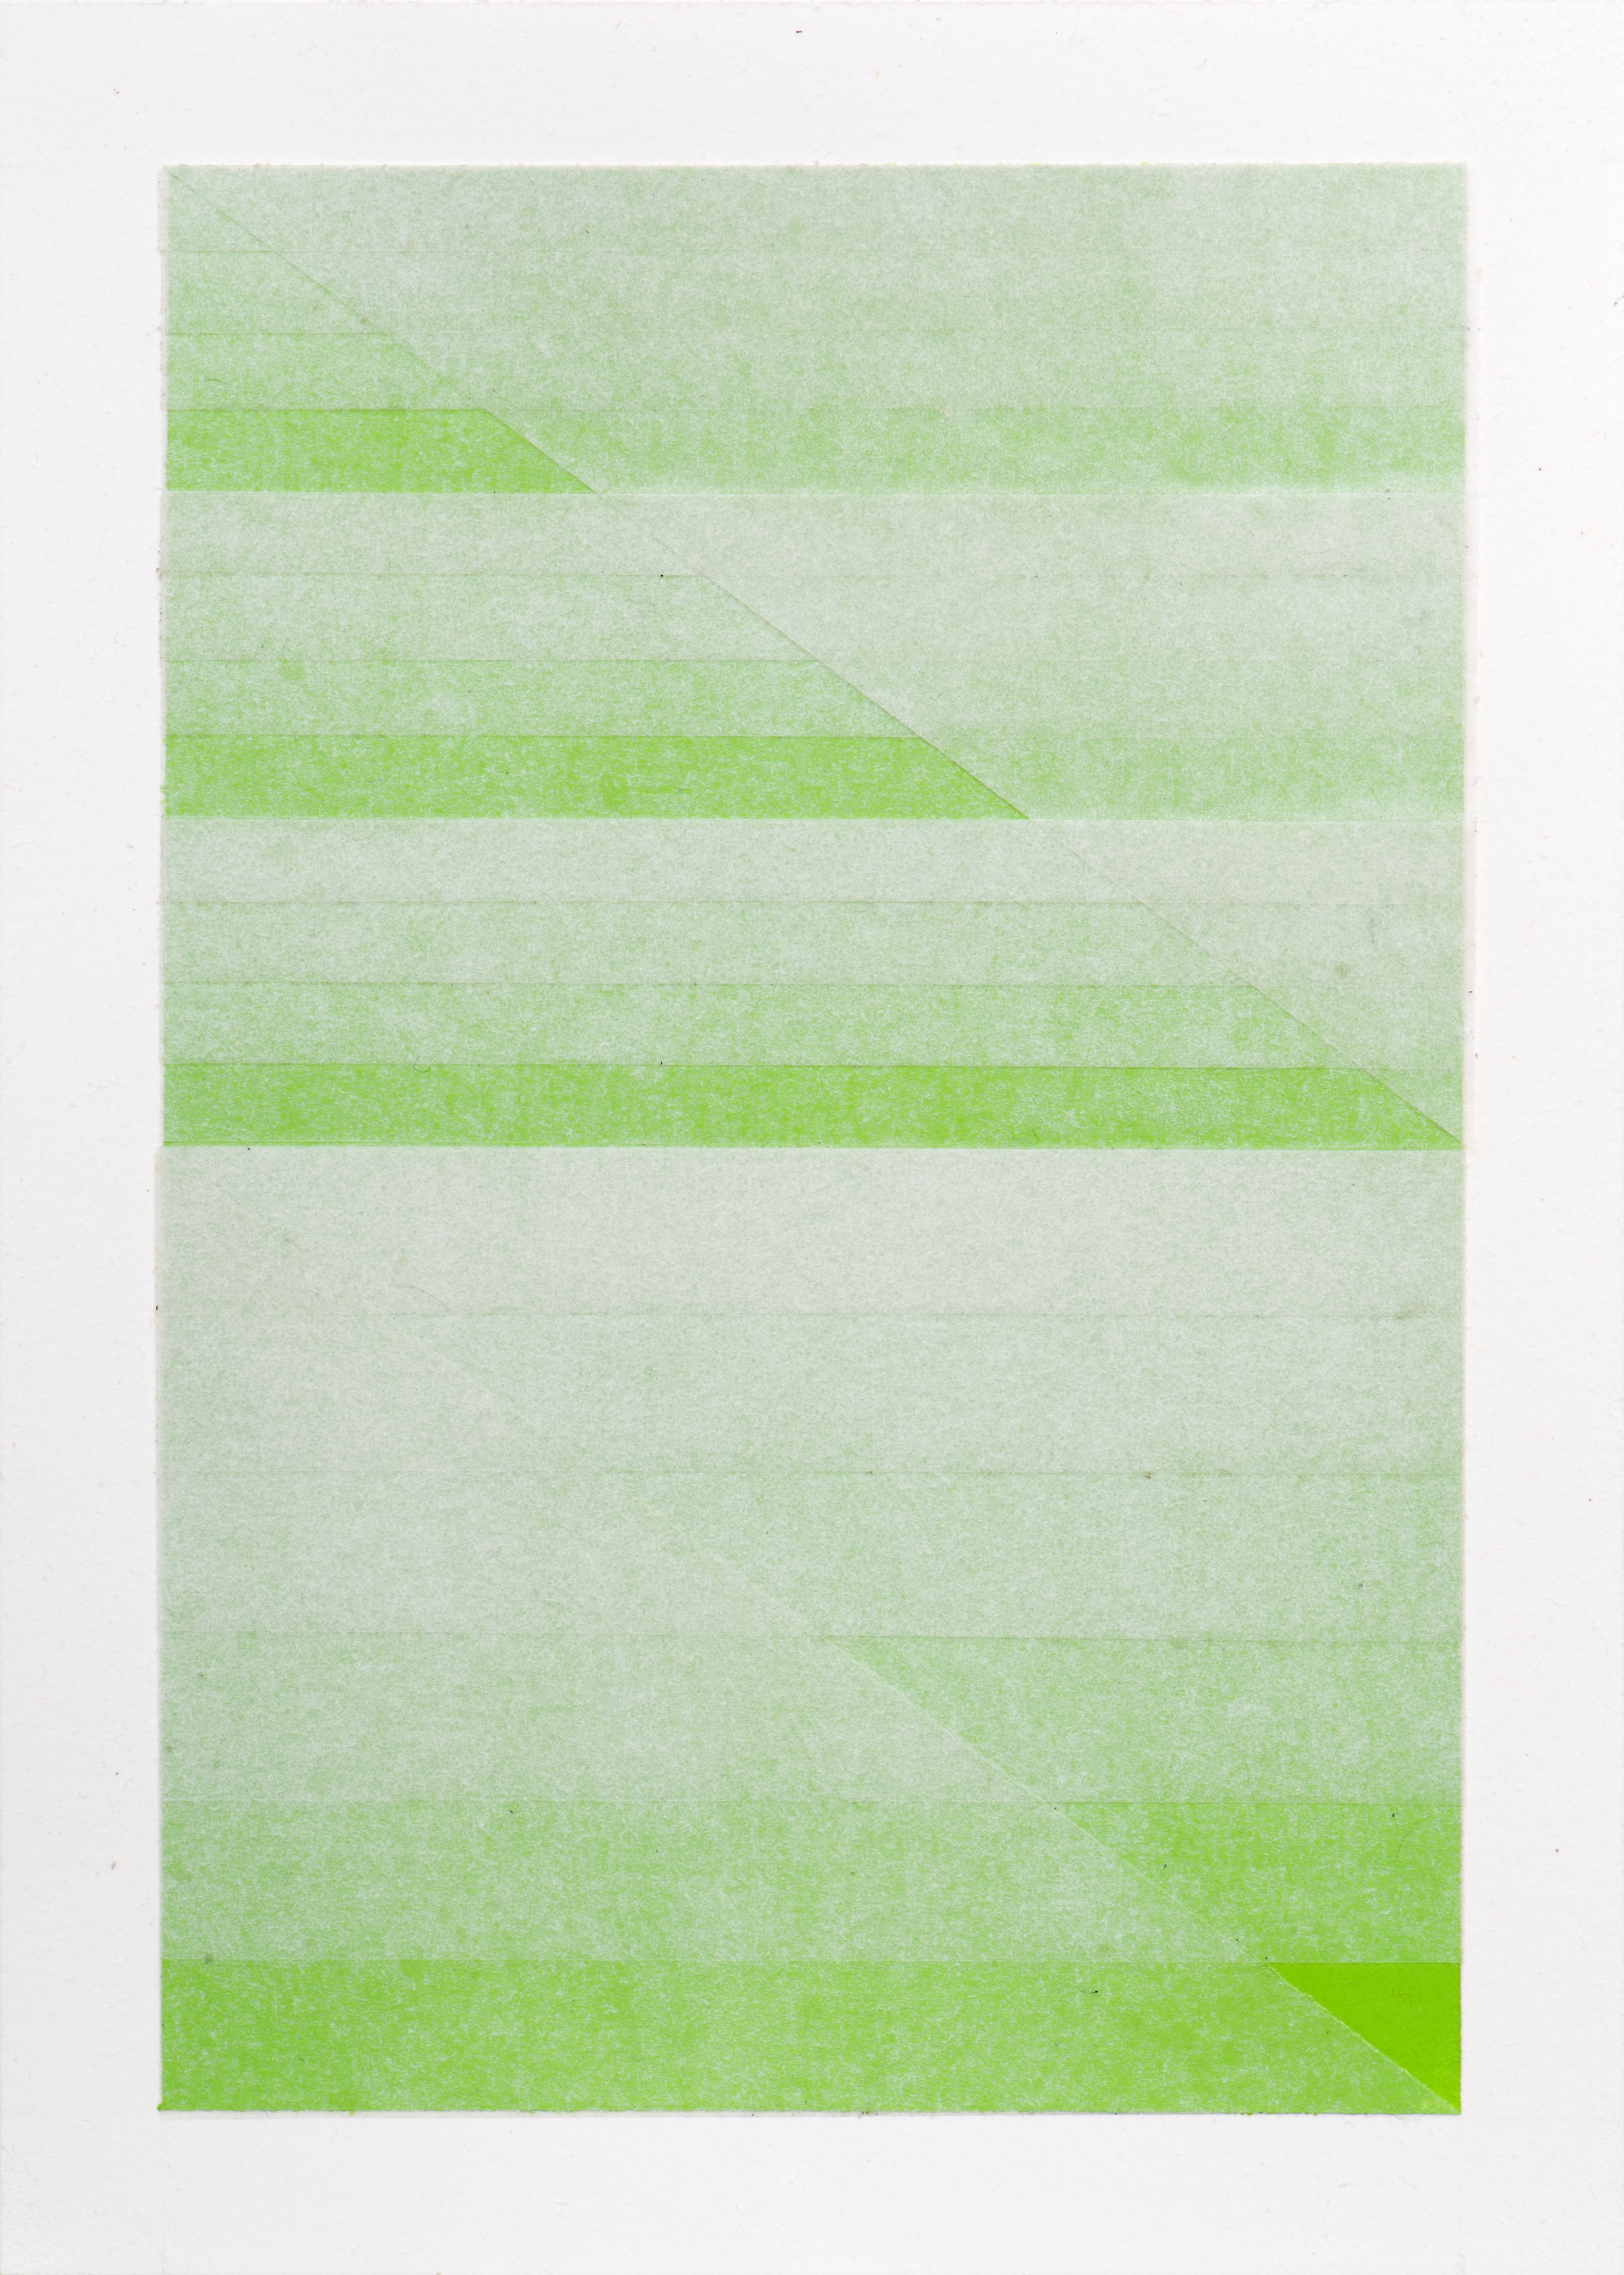   Vivid Lime Green , 2017 Acrylic and vellum on paper 9 3/4 x 6 3/4 inches 